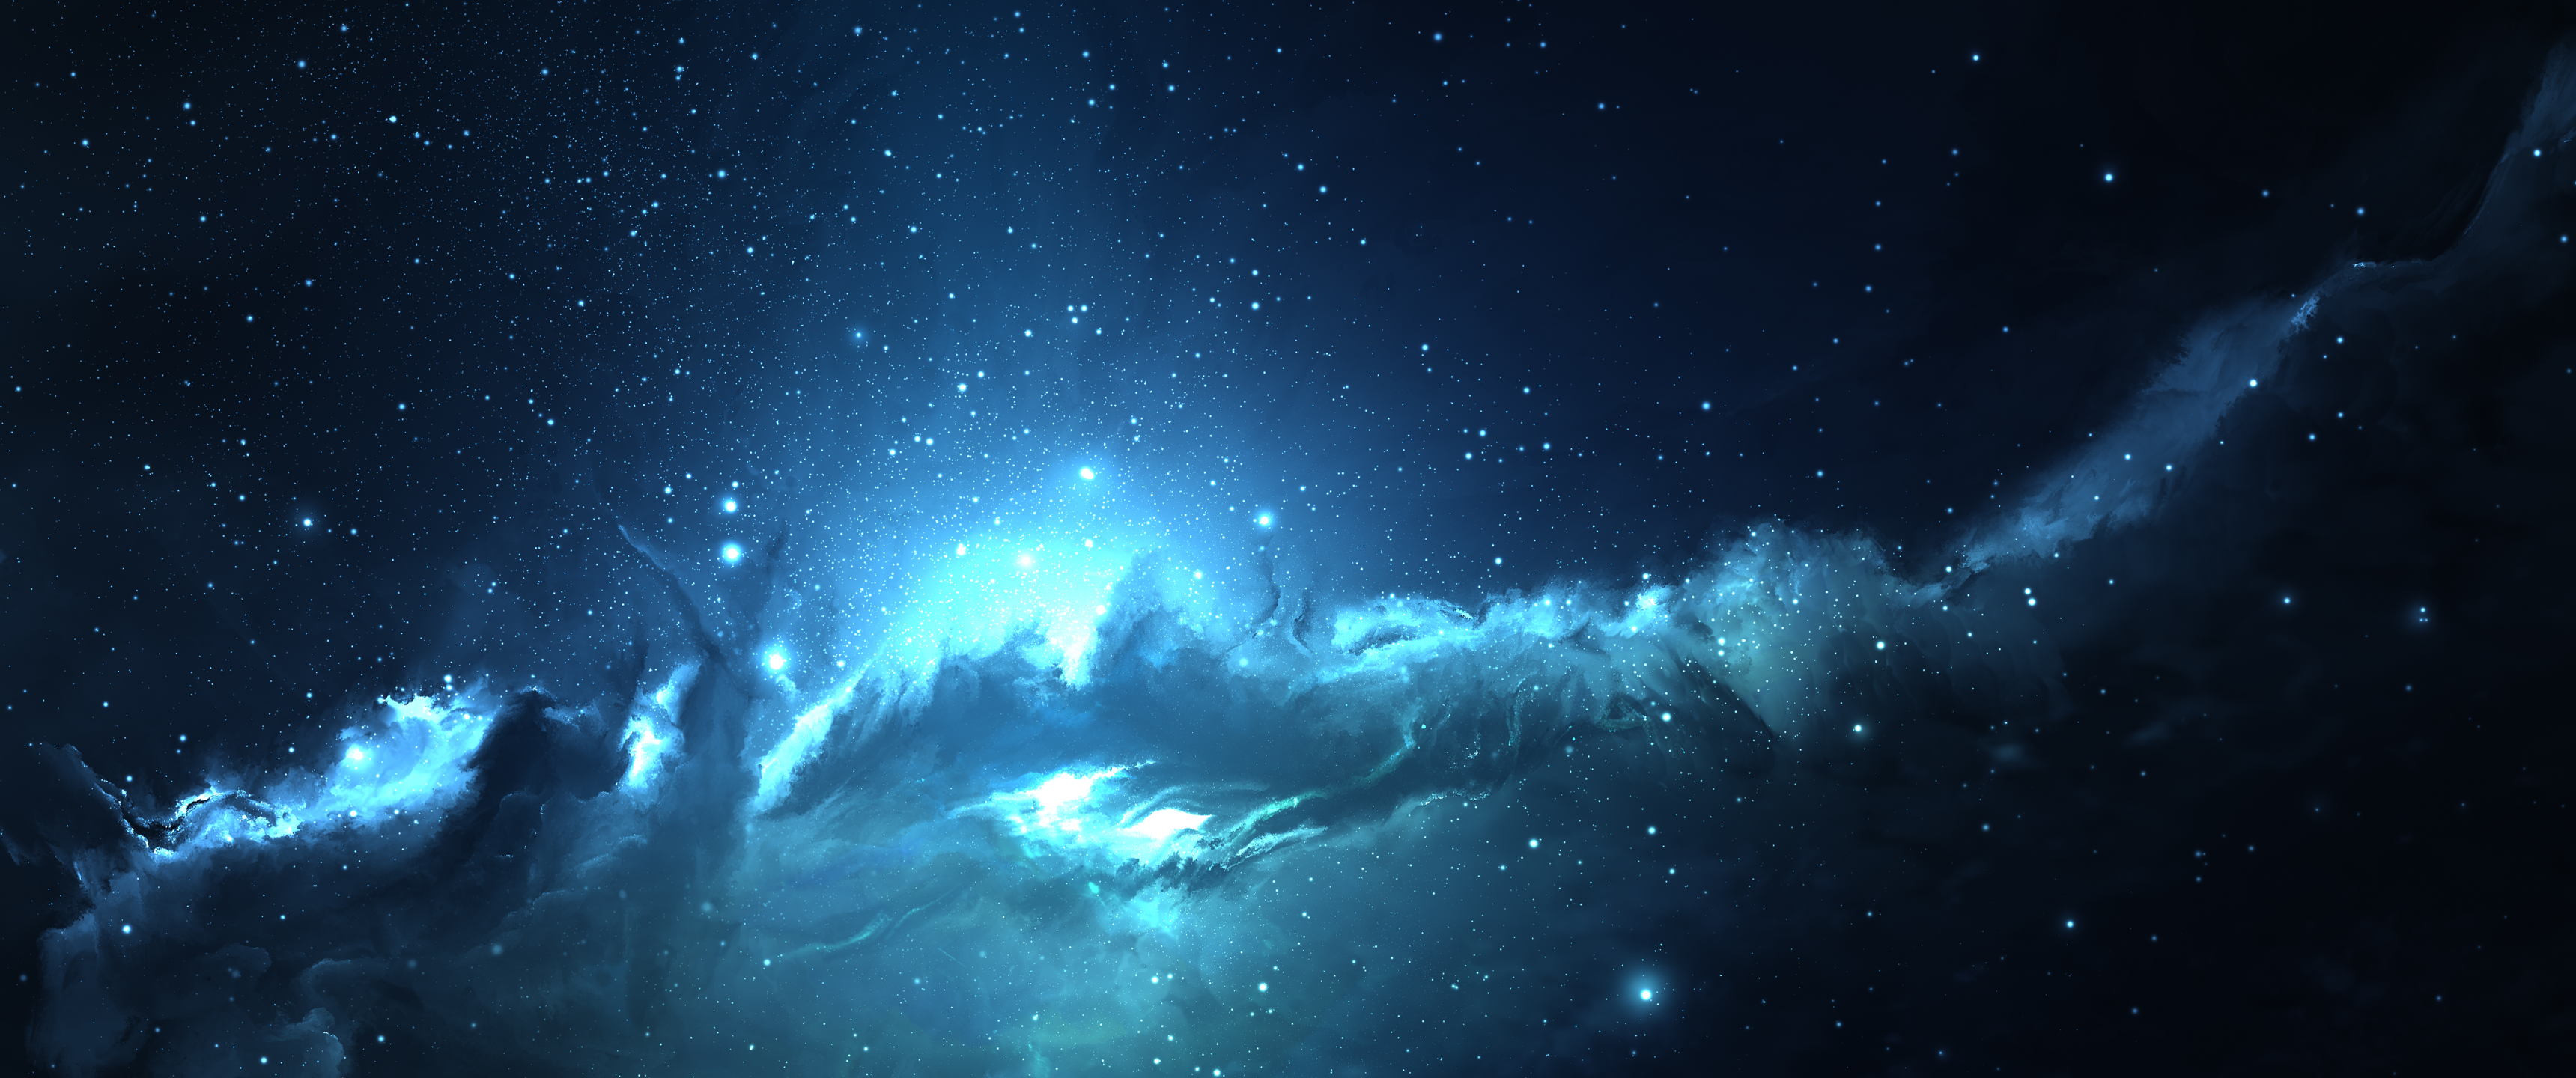 Wallpaper, galaxy, blue, nebula, ultrawide, atmosphere, universe, astronomy, screenshot, computer wallpaper, outer space, astronomical object 3440x1440